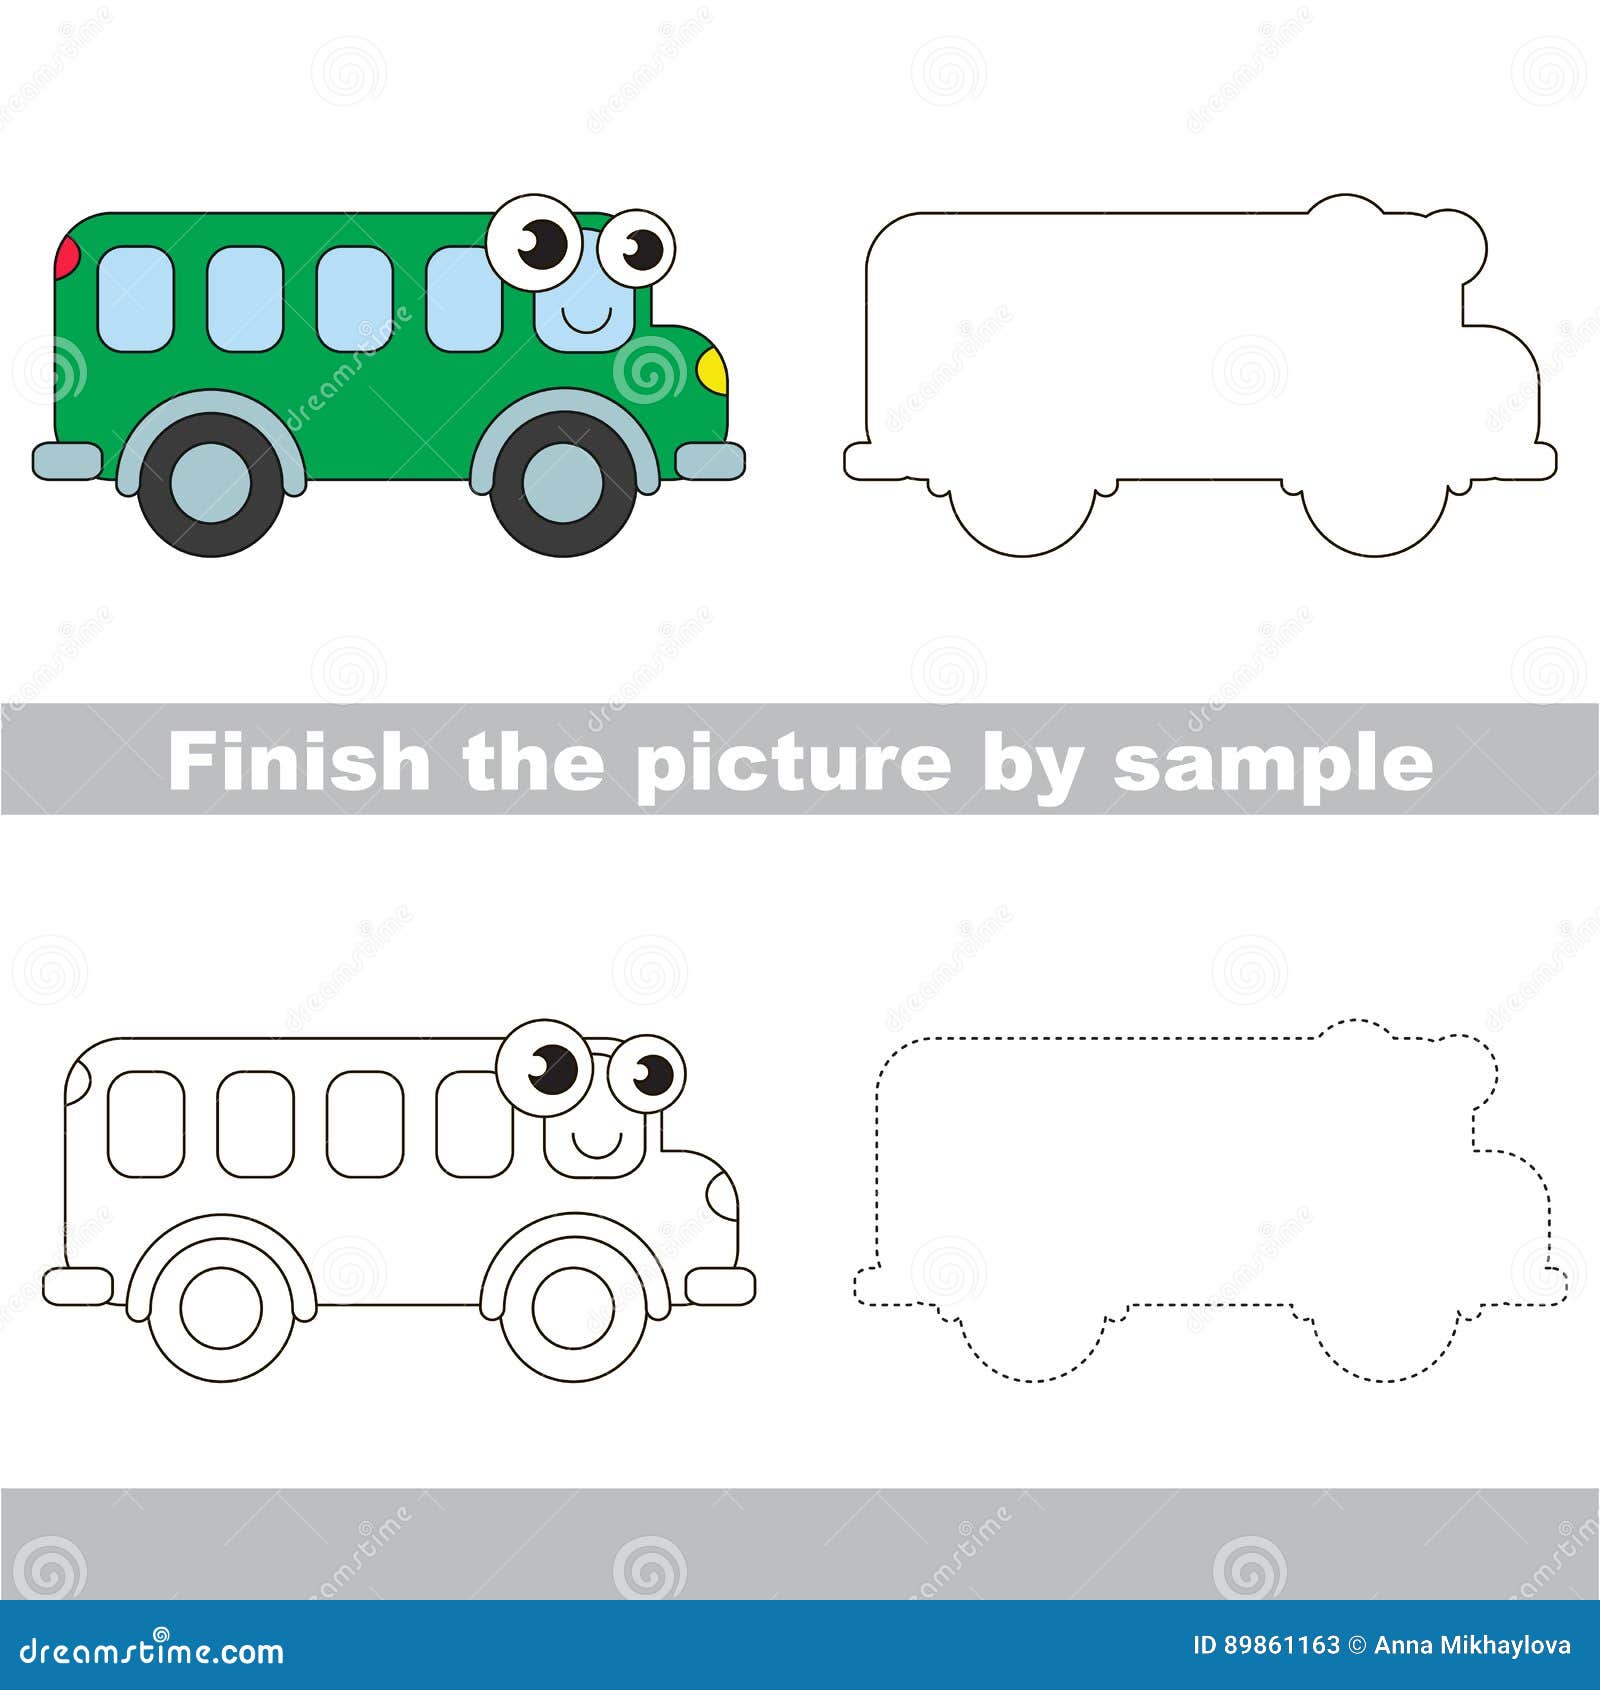 How to Draw a School Bus - Easy Drawing Tutorial For Kids